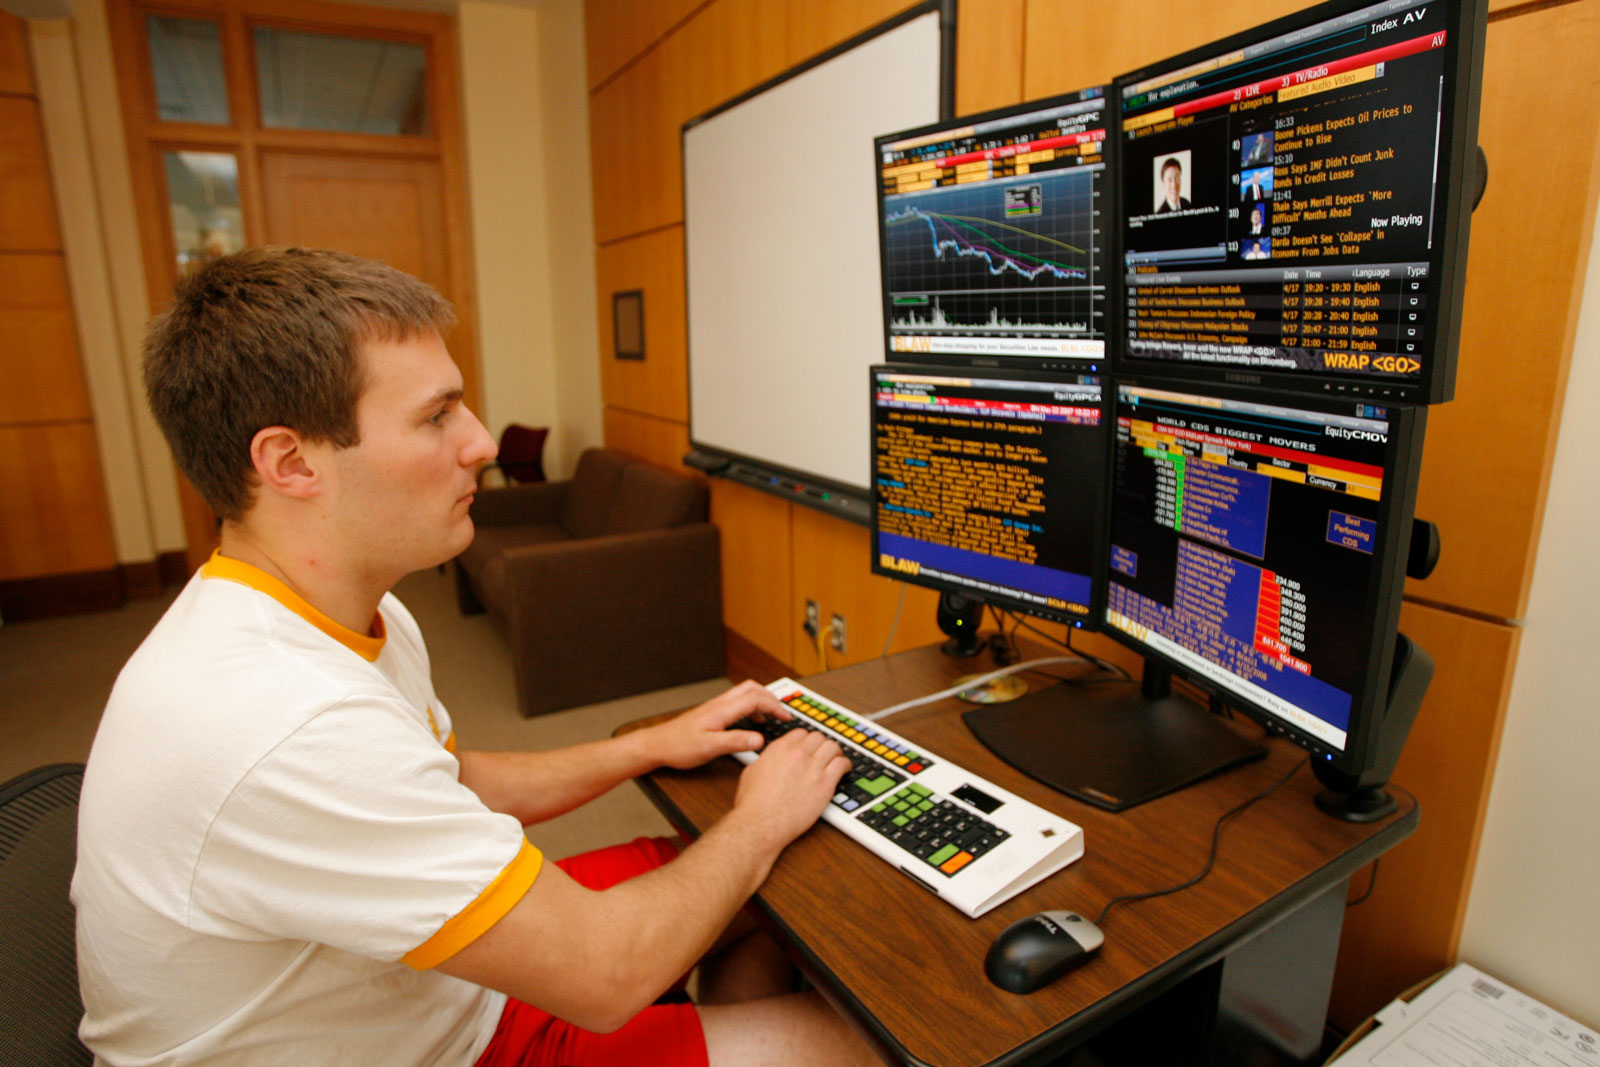 A Bloomberg terminal in use.